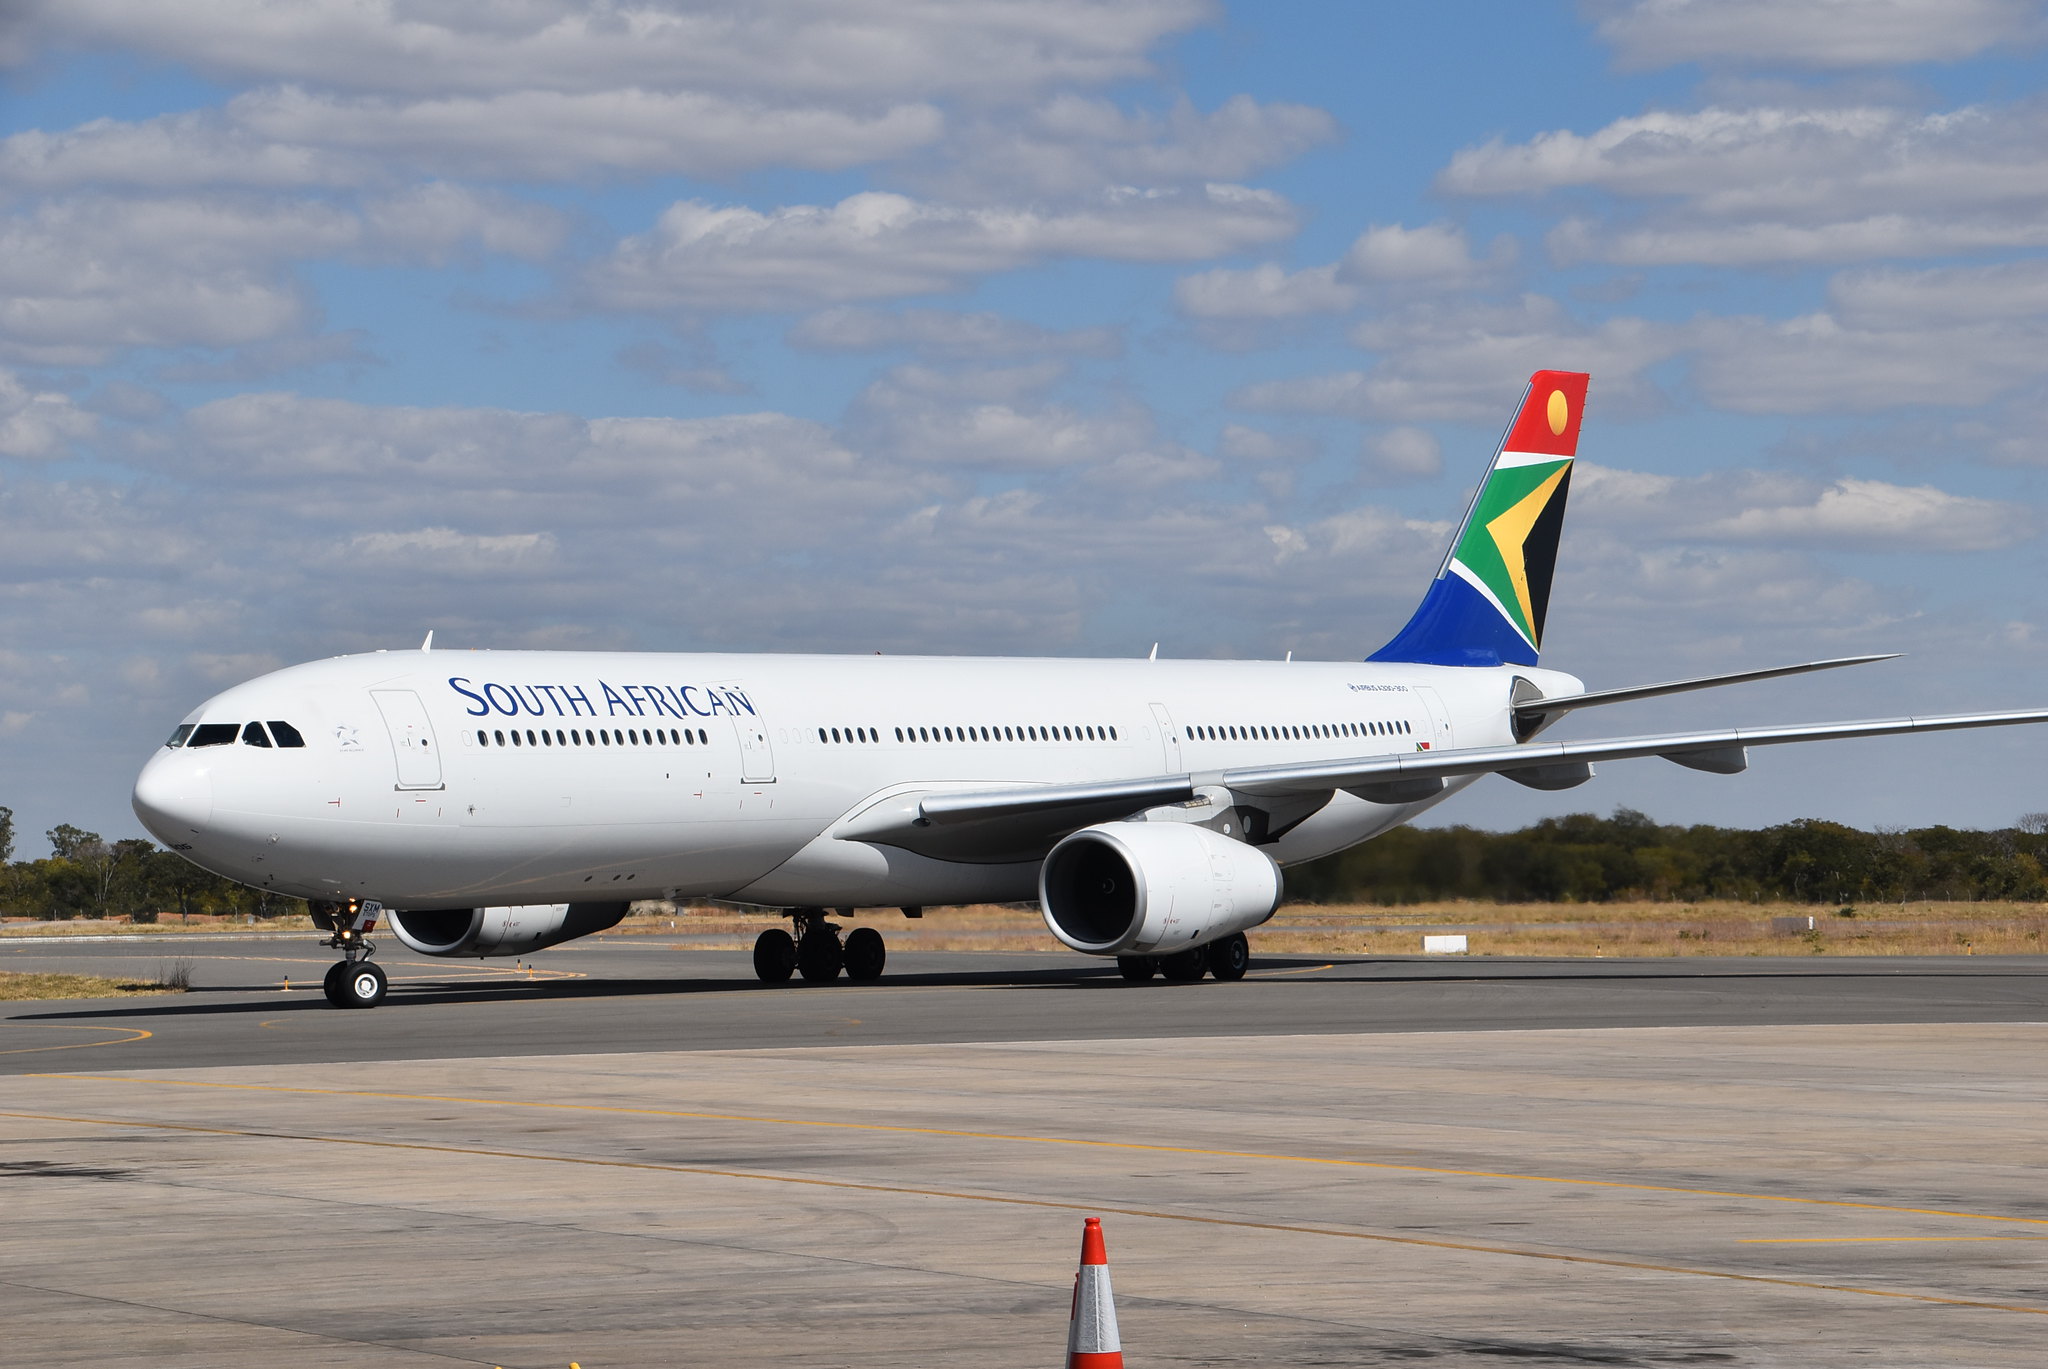 south african air travel